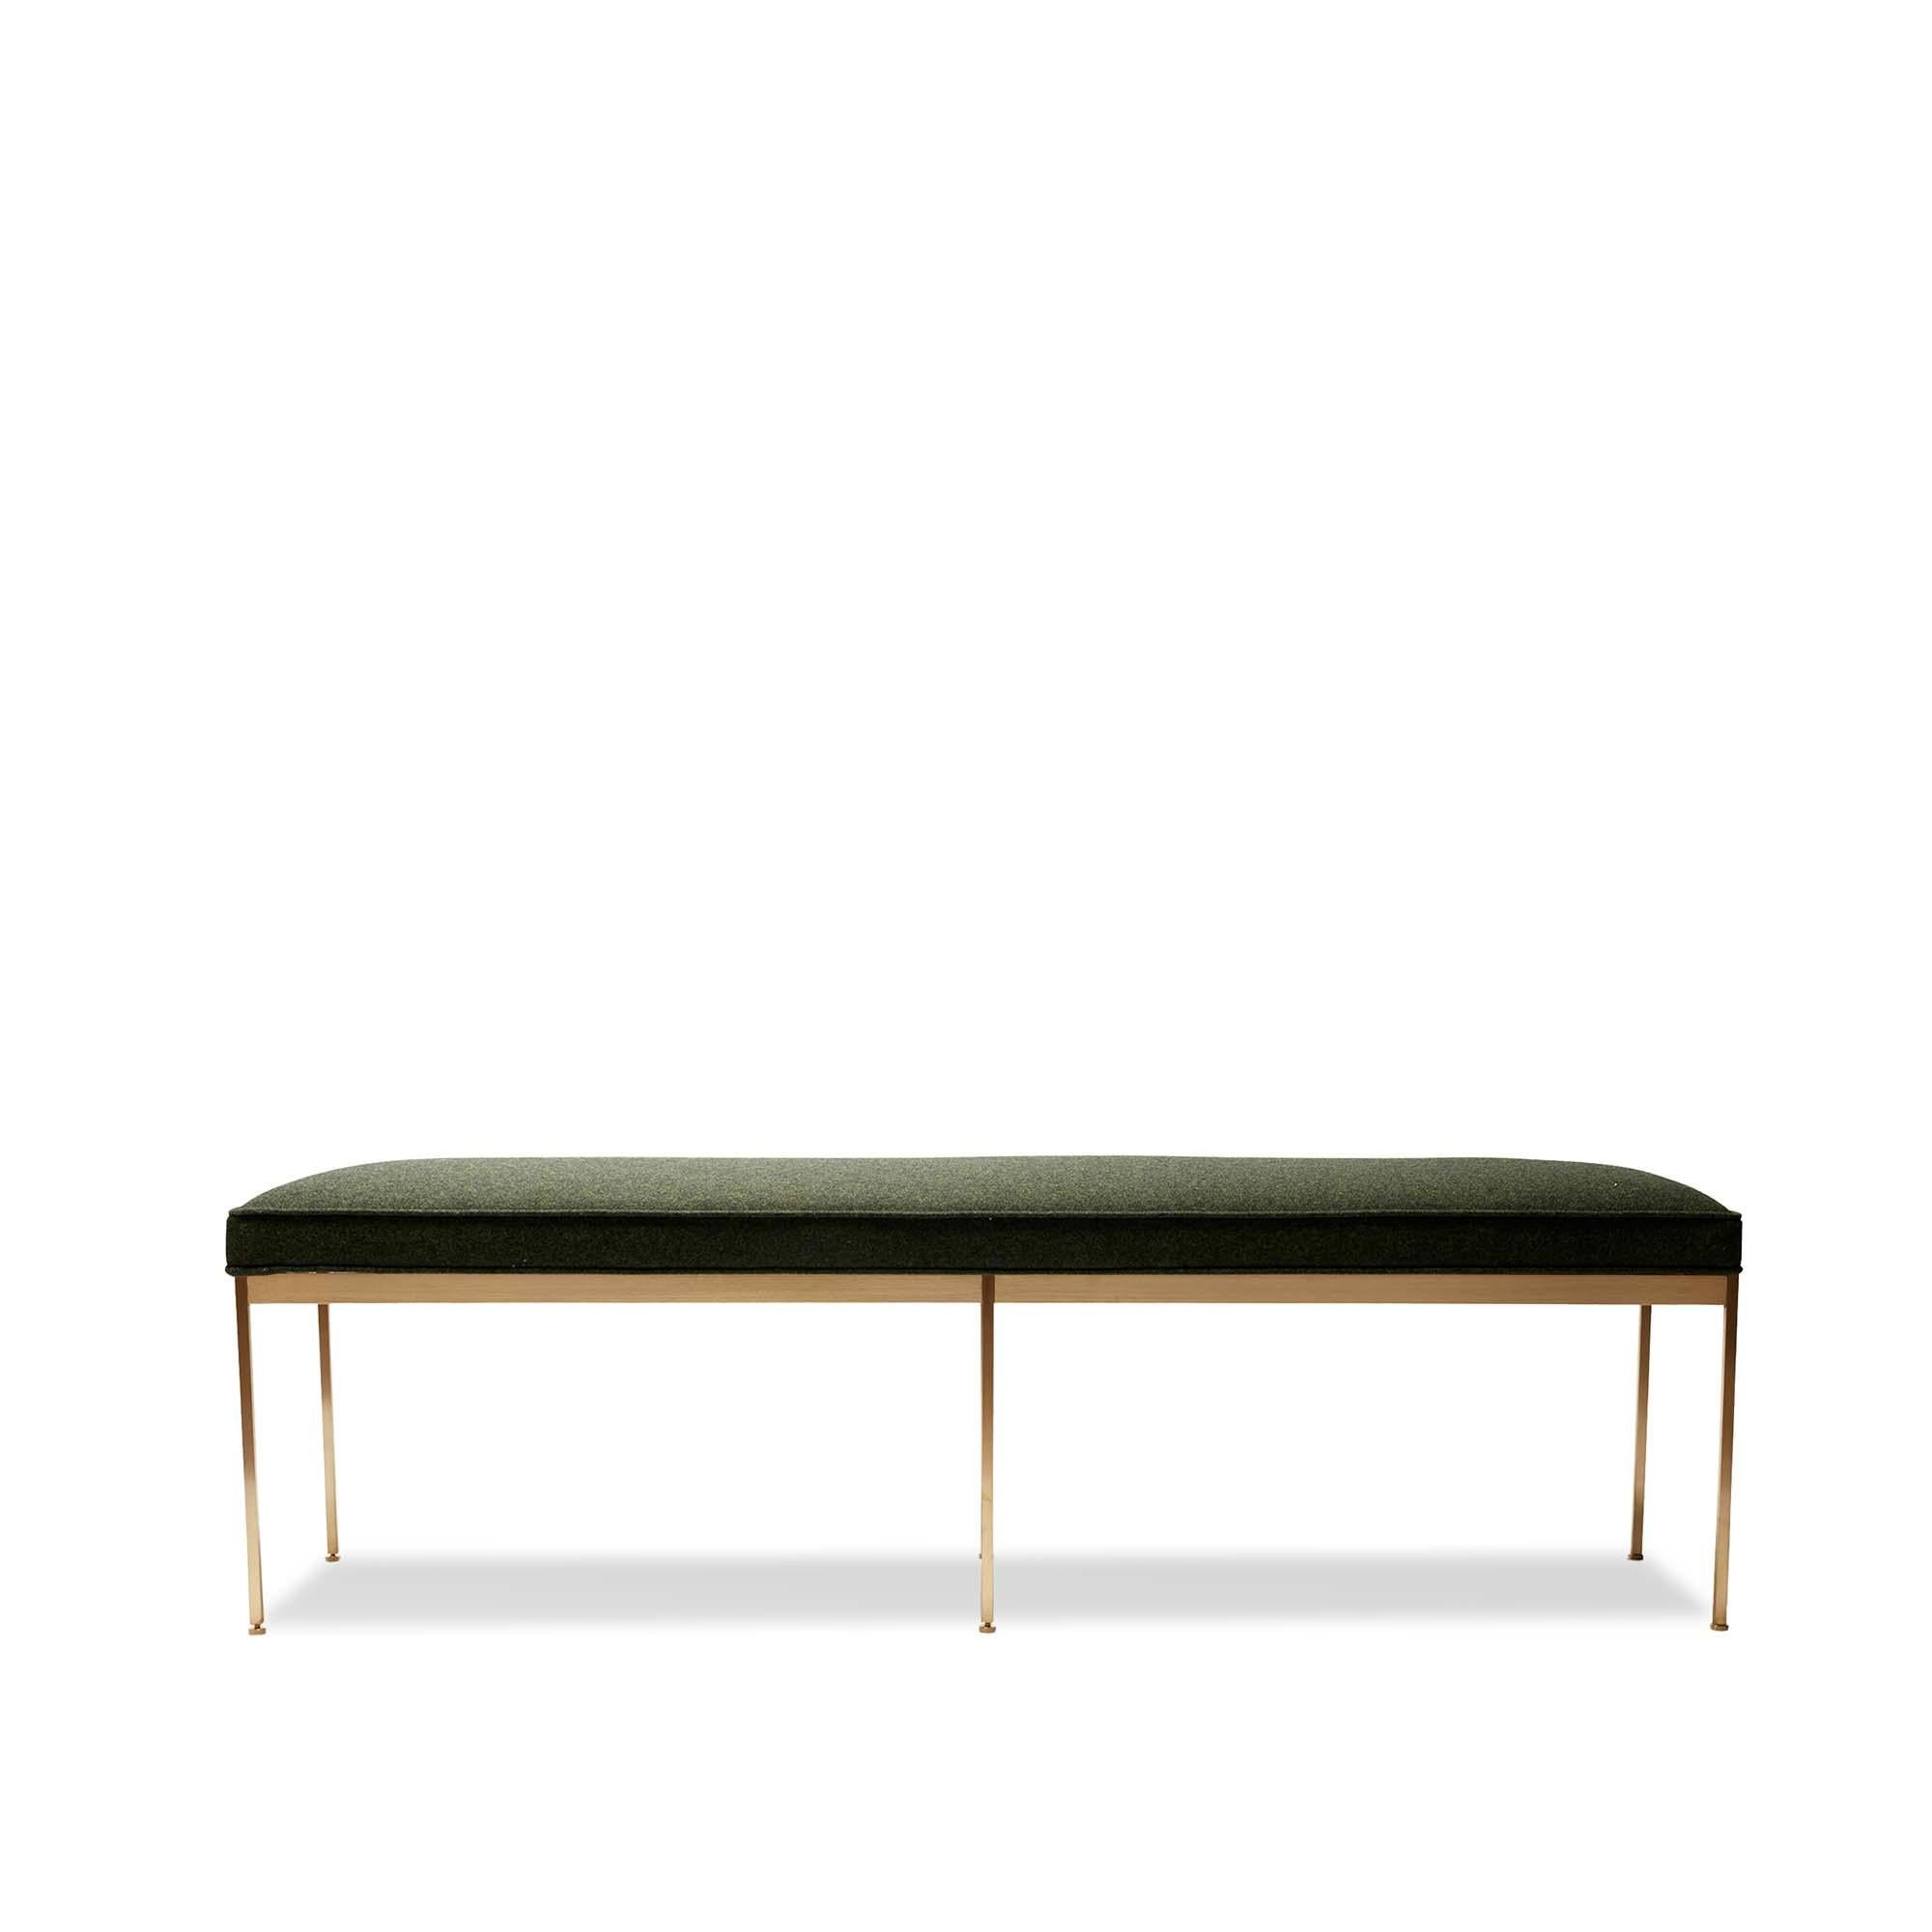 The Paul bench features a solid lacquered brass base and an upholstered seat with piping. Each leg features a rounded leveler. 

The Lawson-Fenning Collection is designed and handmade in Los Angeles, California. Reach out to discover what options